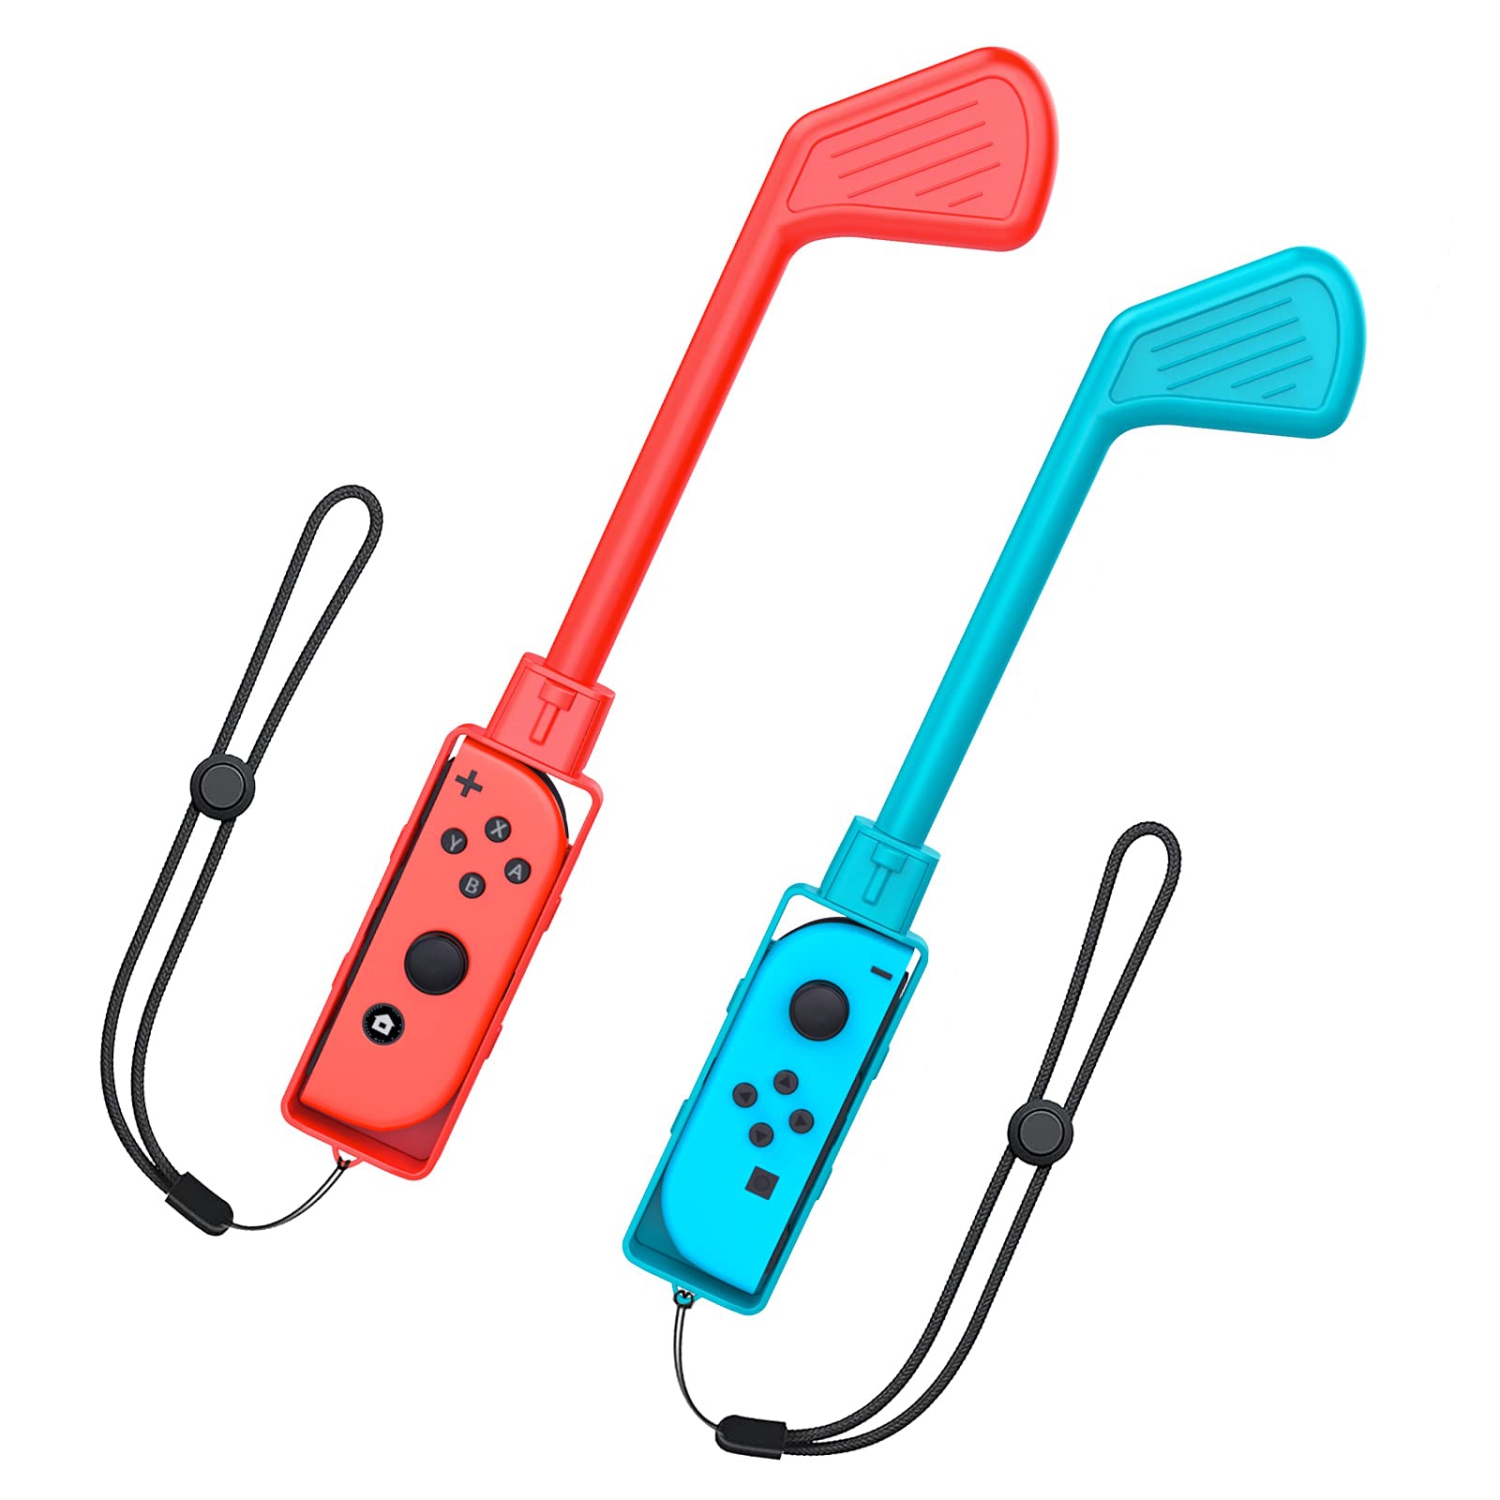 TiMOVO Golf Clubs Compatible with Nintendo Switch Mario Golf: Super Rush Game/Switch Sports, 2 Pack Golf Handle with Hand St